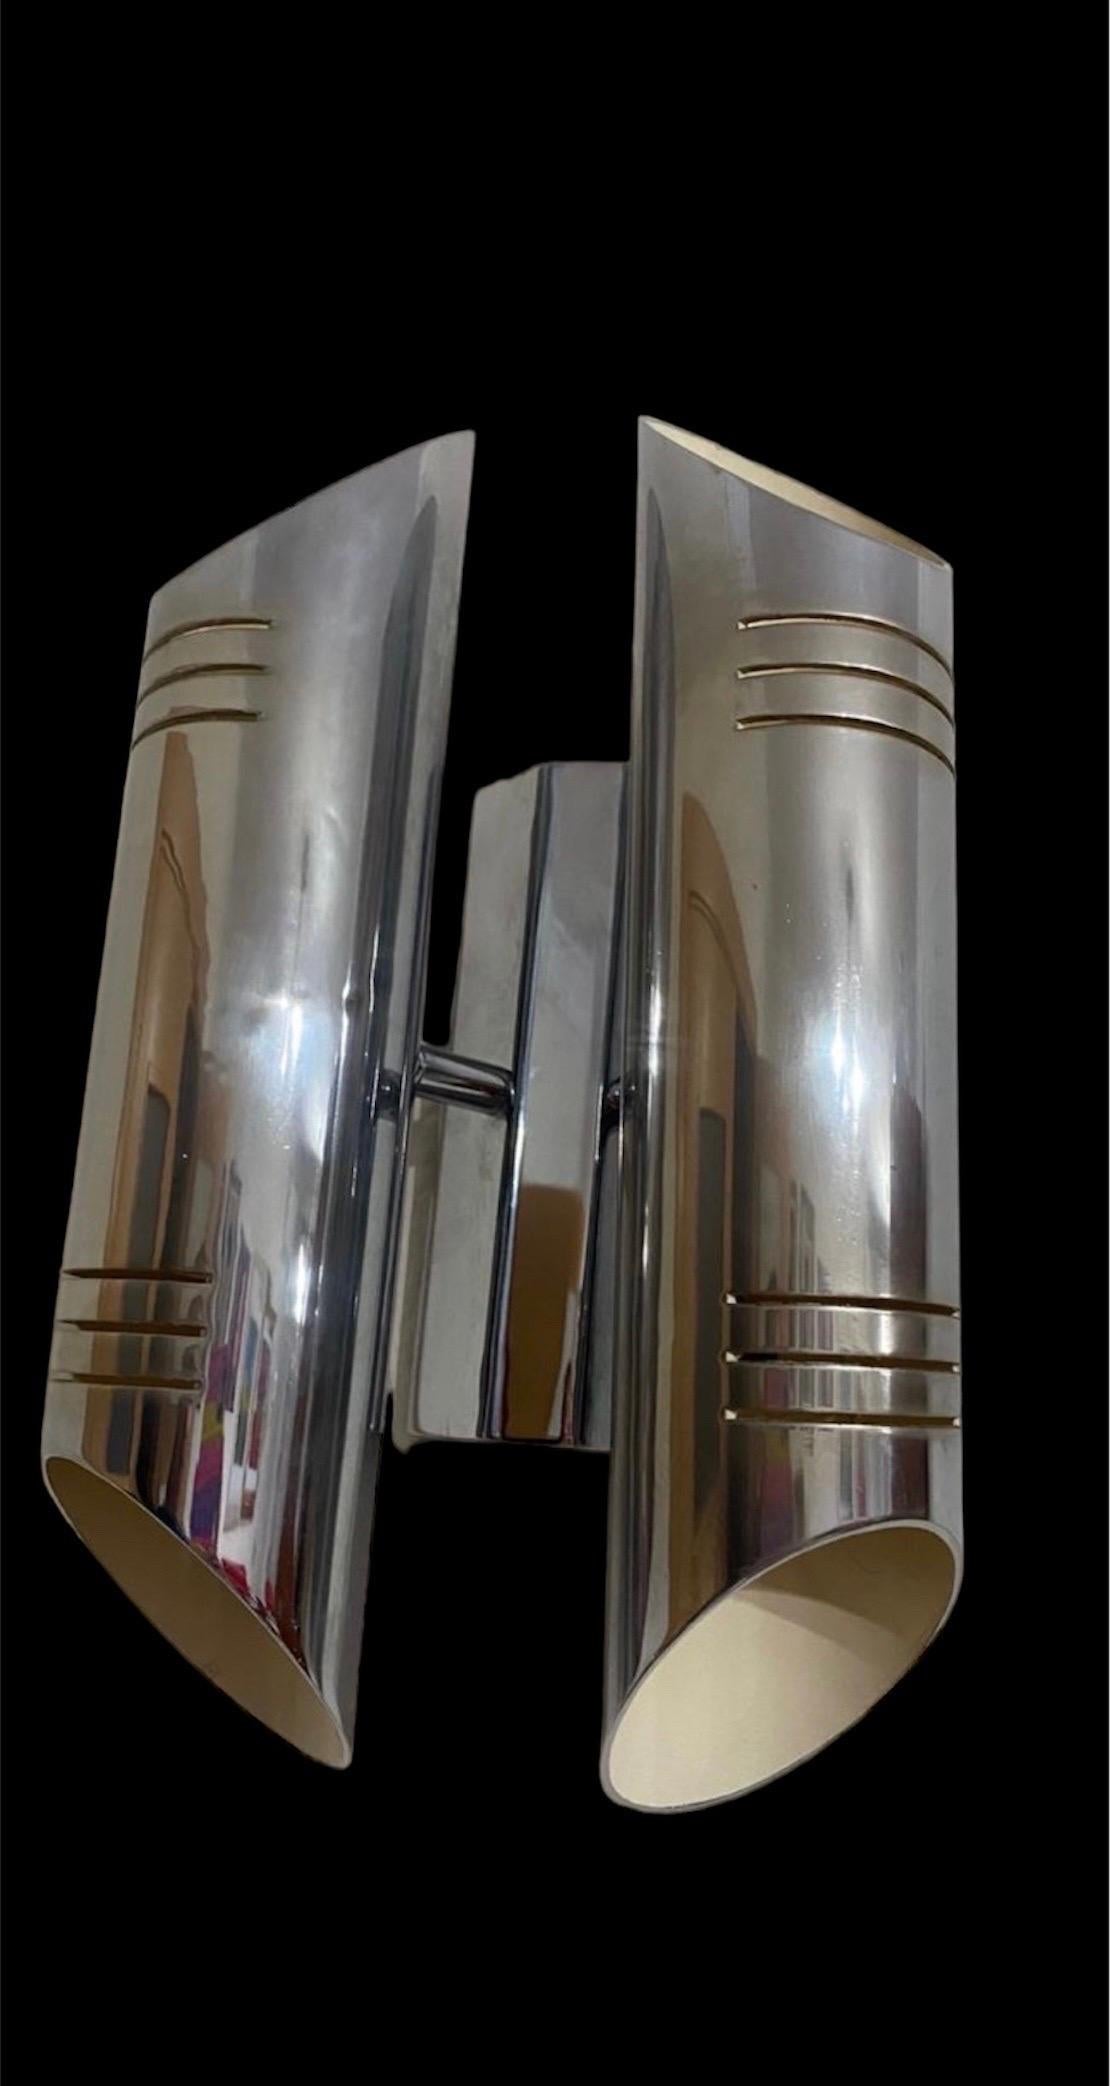 Superbe pair of tubular wall lamp Space Age produced  in the 70s.

Structure in chromed metal.

Unique object that will illuminate wonderfully and bring a real design touch to your interior.

Verified electricity, time mark consistent with the age